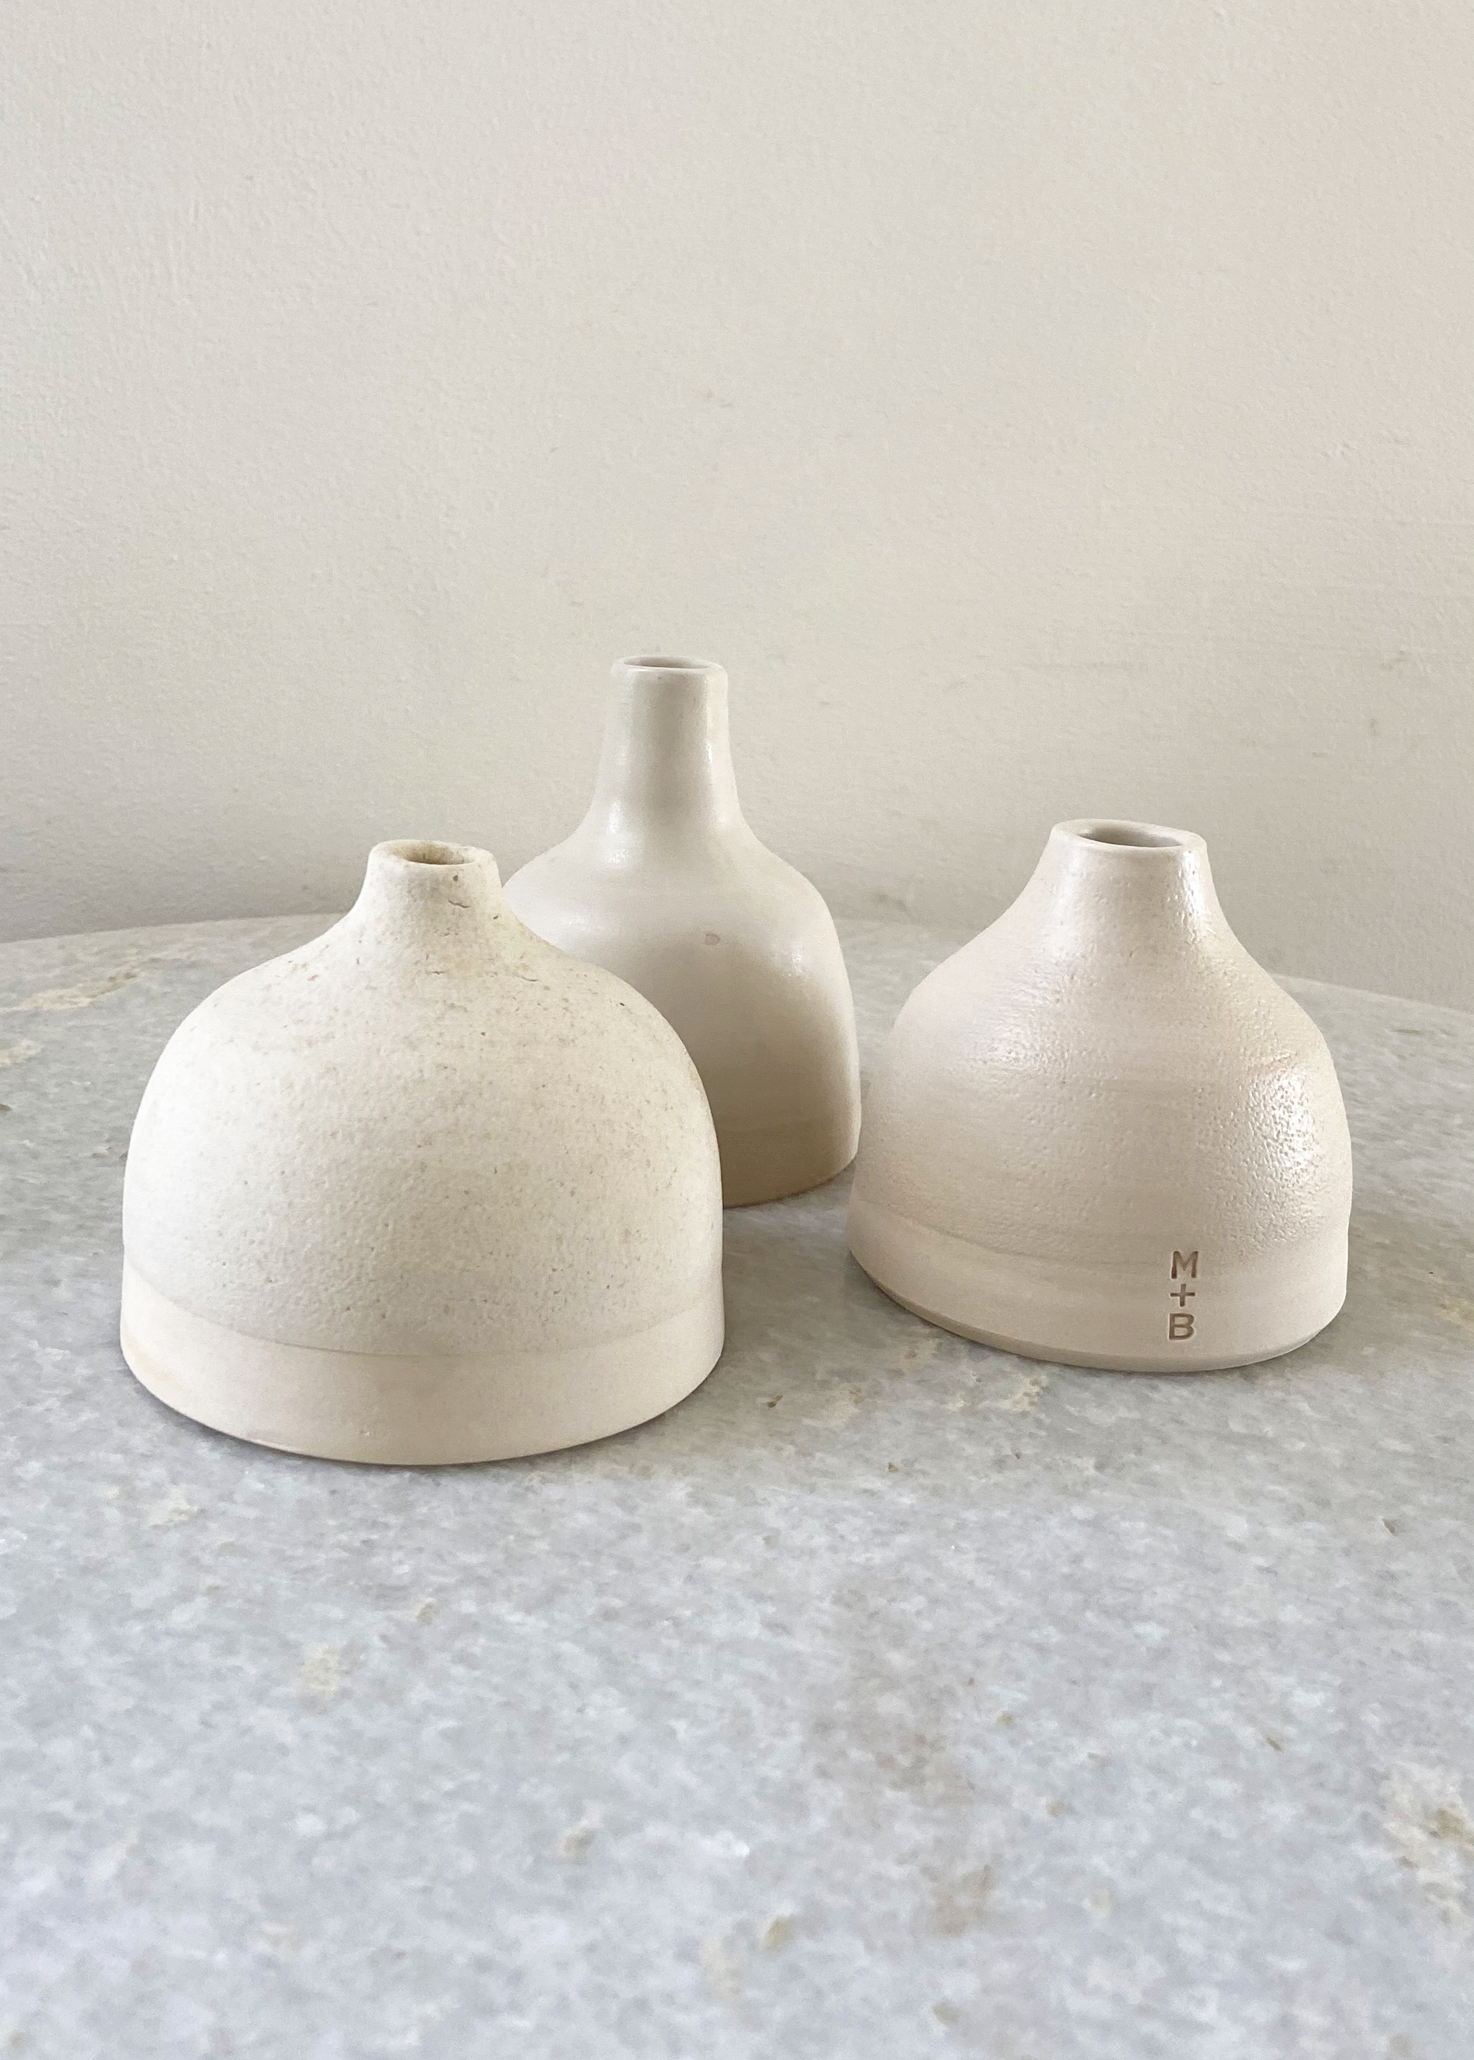 Squat vases by Gill Marles